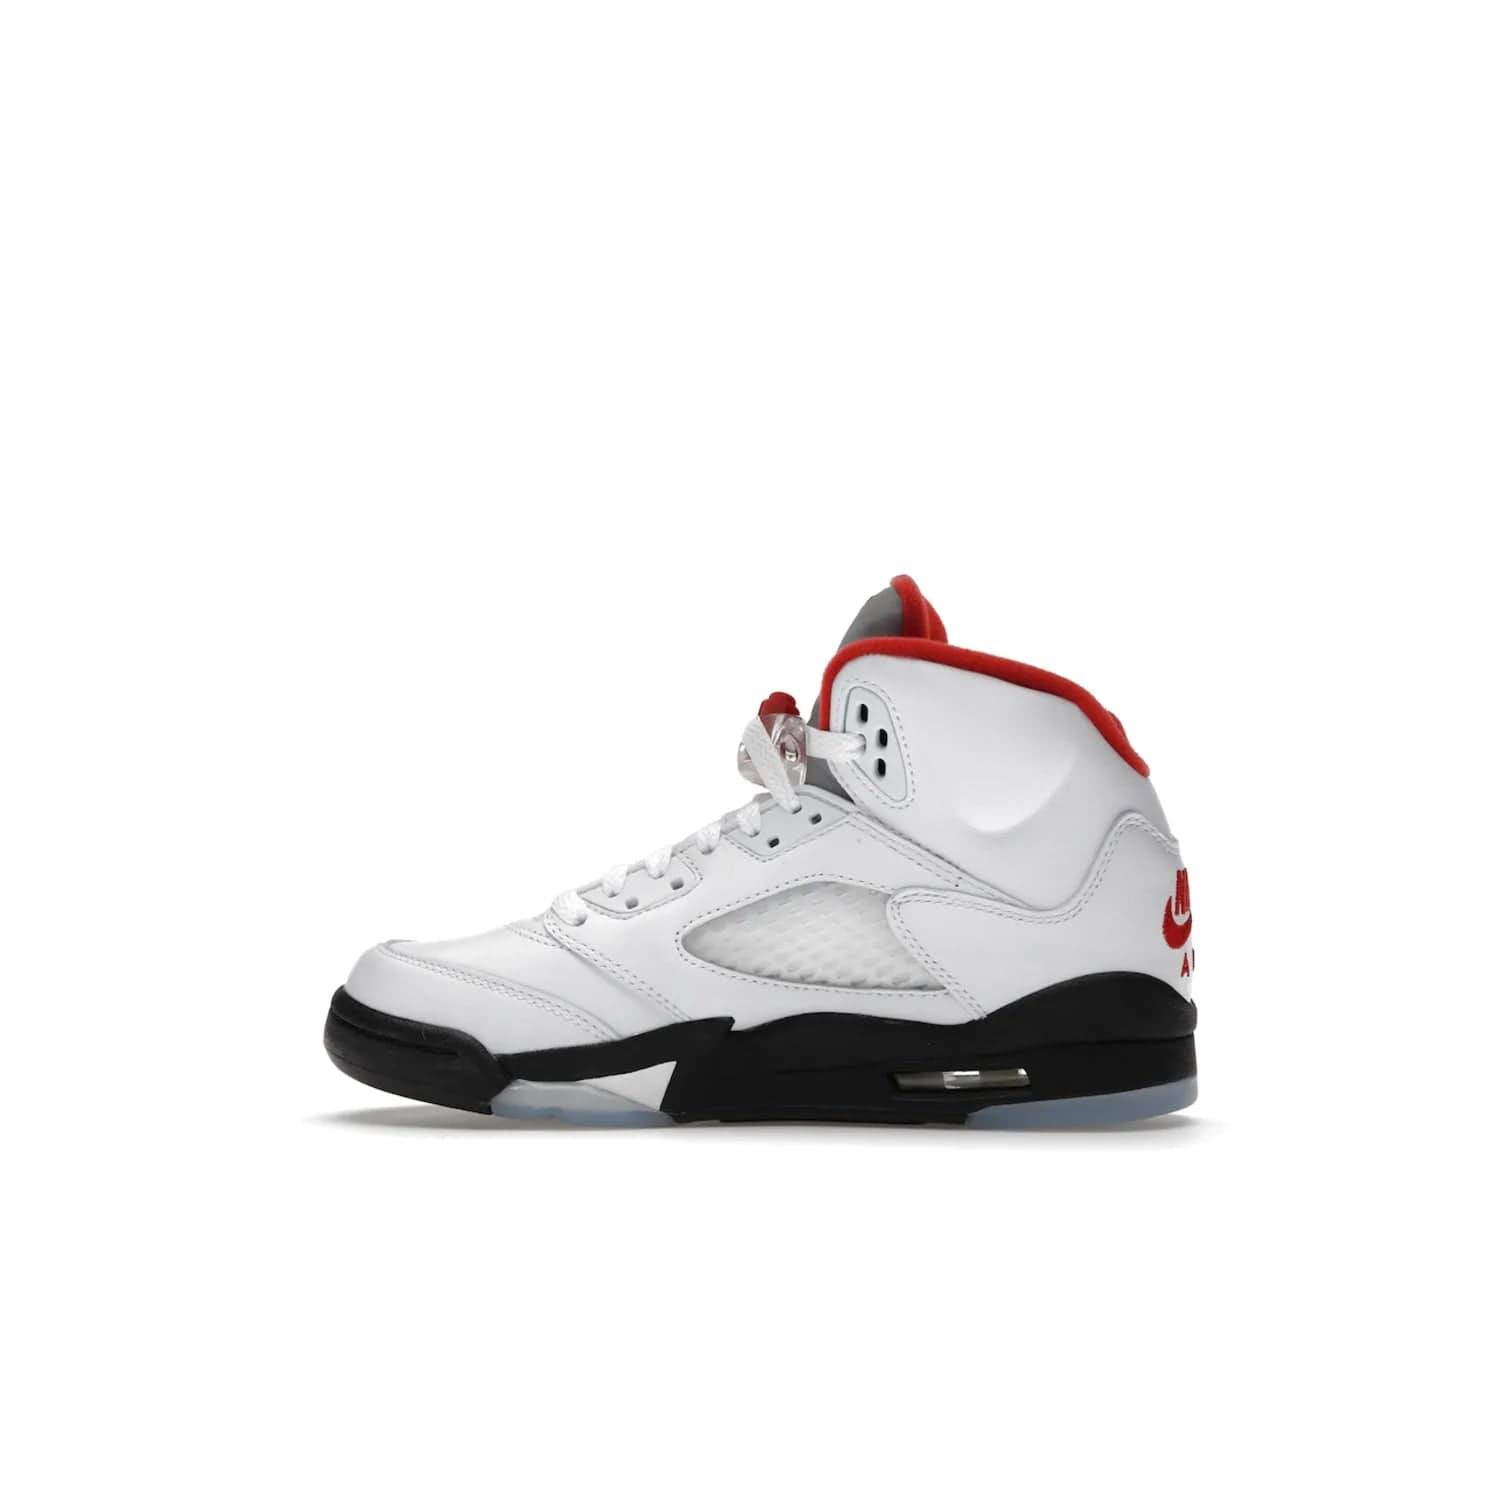 Jordan 5 Retro Fire Red Silver Tongue (2020) (GS) - Image 20 - Only at www.BallersClubKickz.com - A stylish option for any grade schooler. The Air Jordan 5 Retro Fire Red Silver Tongue 2020 GS features a combination of four hues, premium white leather, a clear mesh mid-upper and a reflective silver tongue. An icy translucent blue outsole completes the look. Available on May 2, $150.